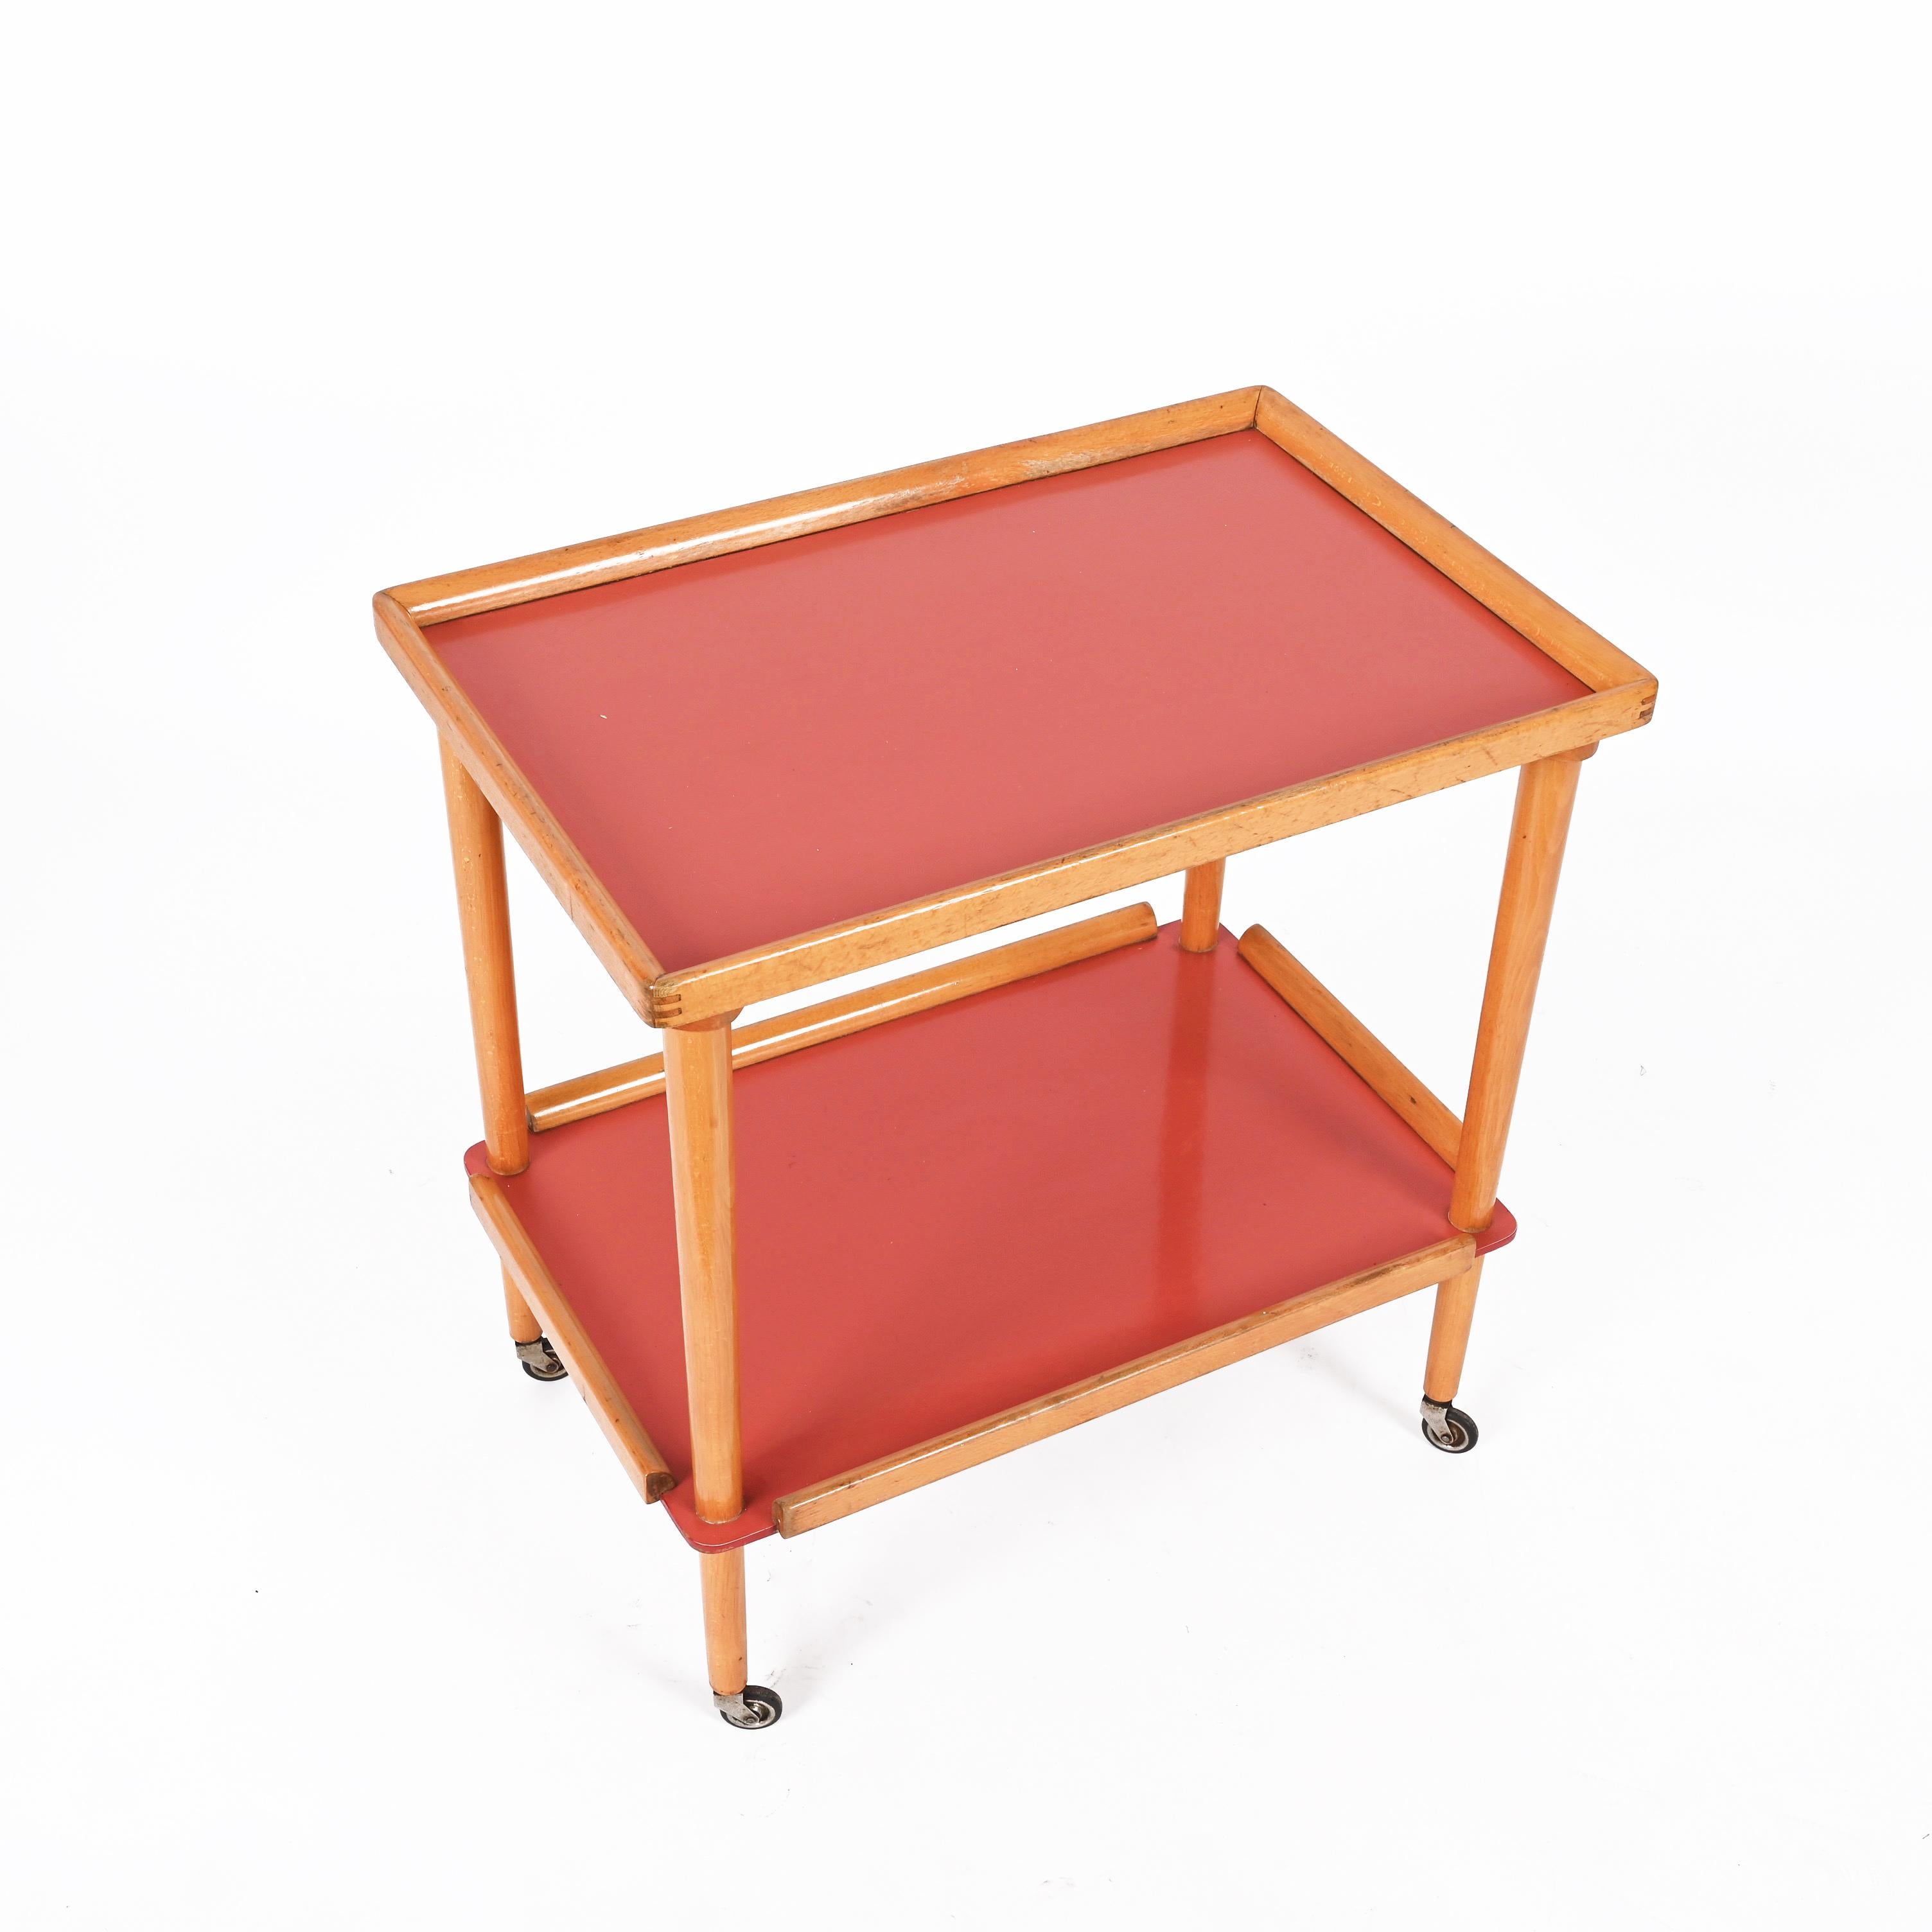 Midcentury Italian Beech Wood and Formica Red Two Tiered Bar Cart, 1960s For Sale 6